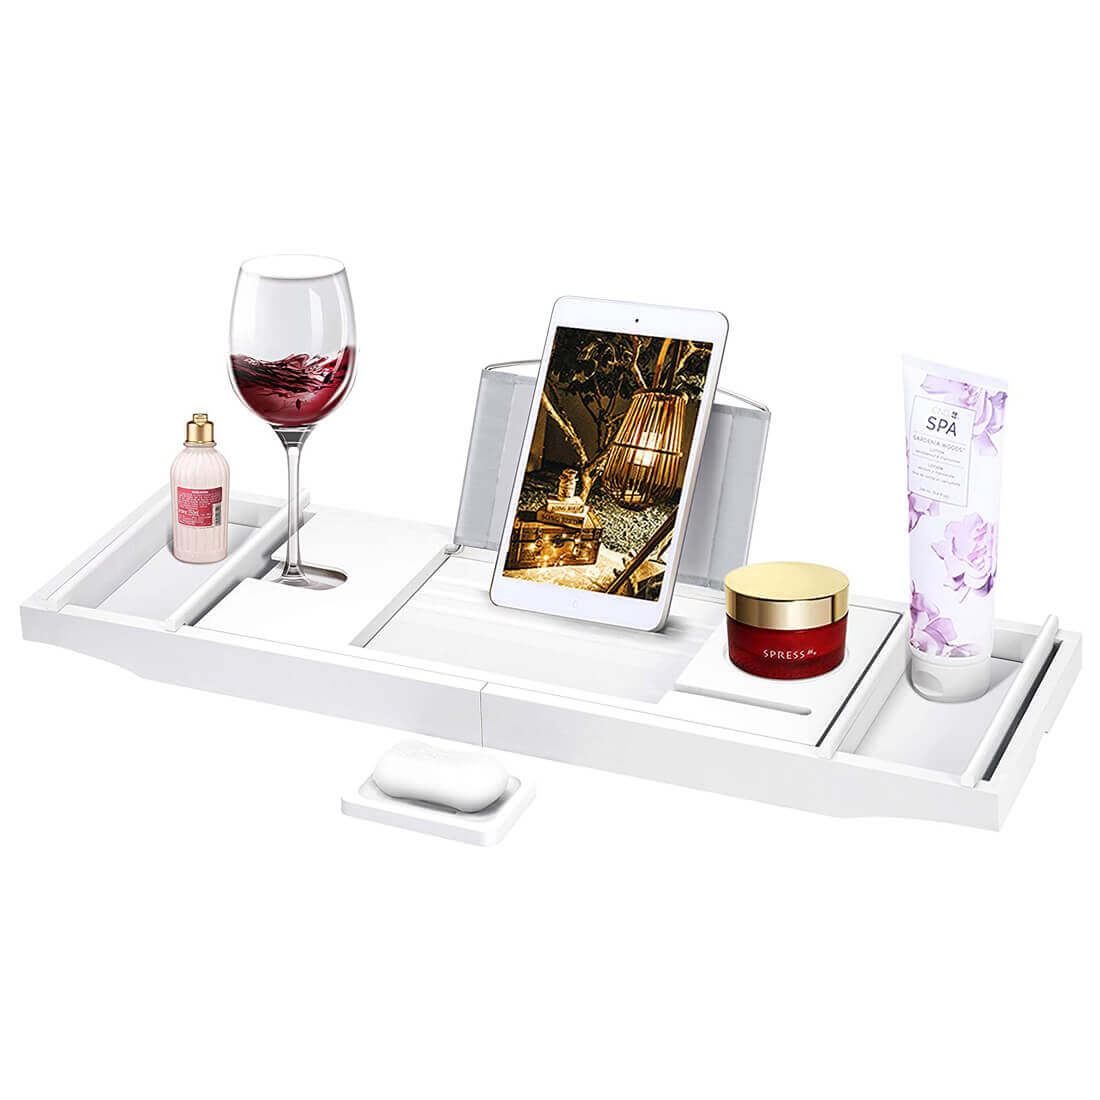 VIVOHOME Expandable 43 Inch Bamboo Bathtub Caddy Tray with Smartphone Tablet Book Holders, Soap Tray, Wine Glass Slot, White